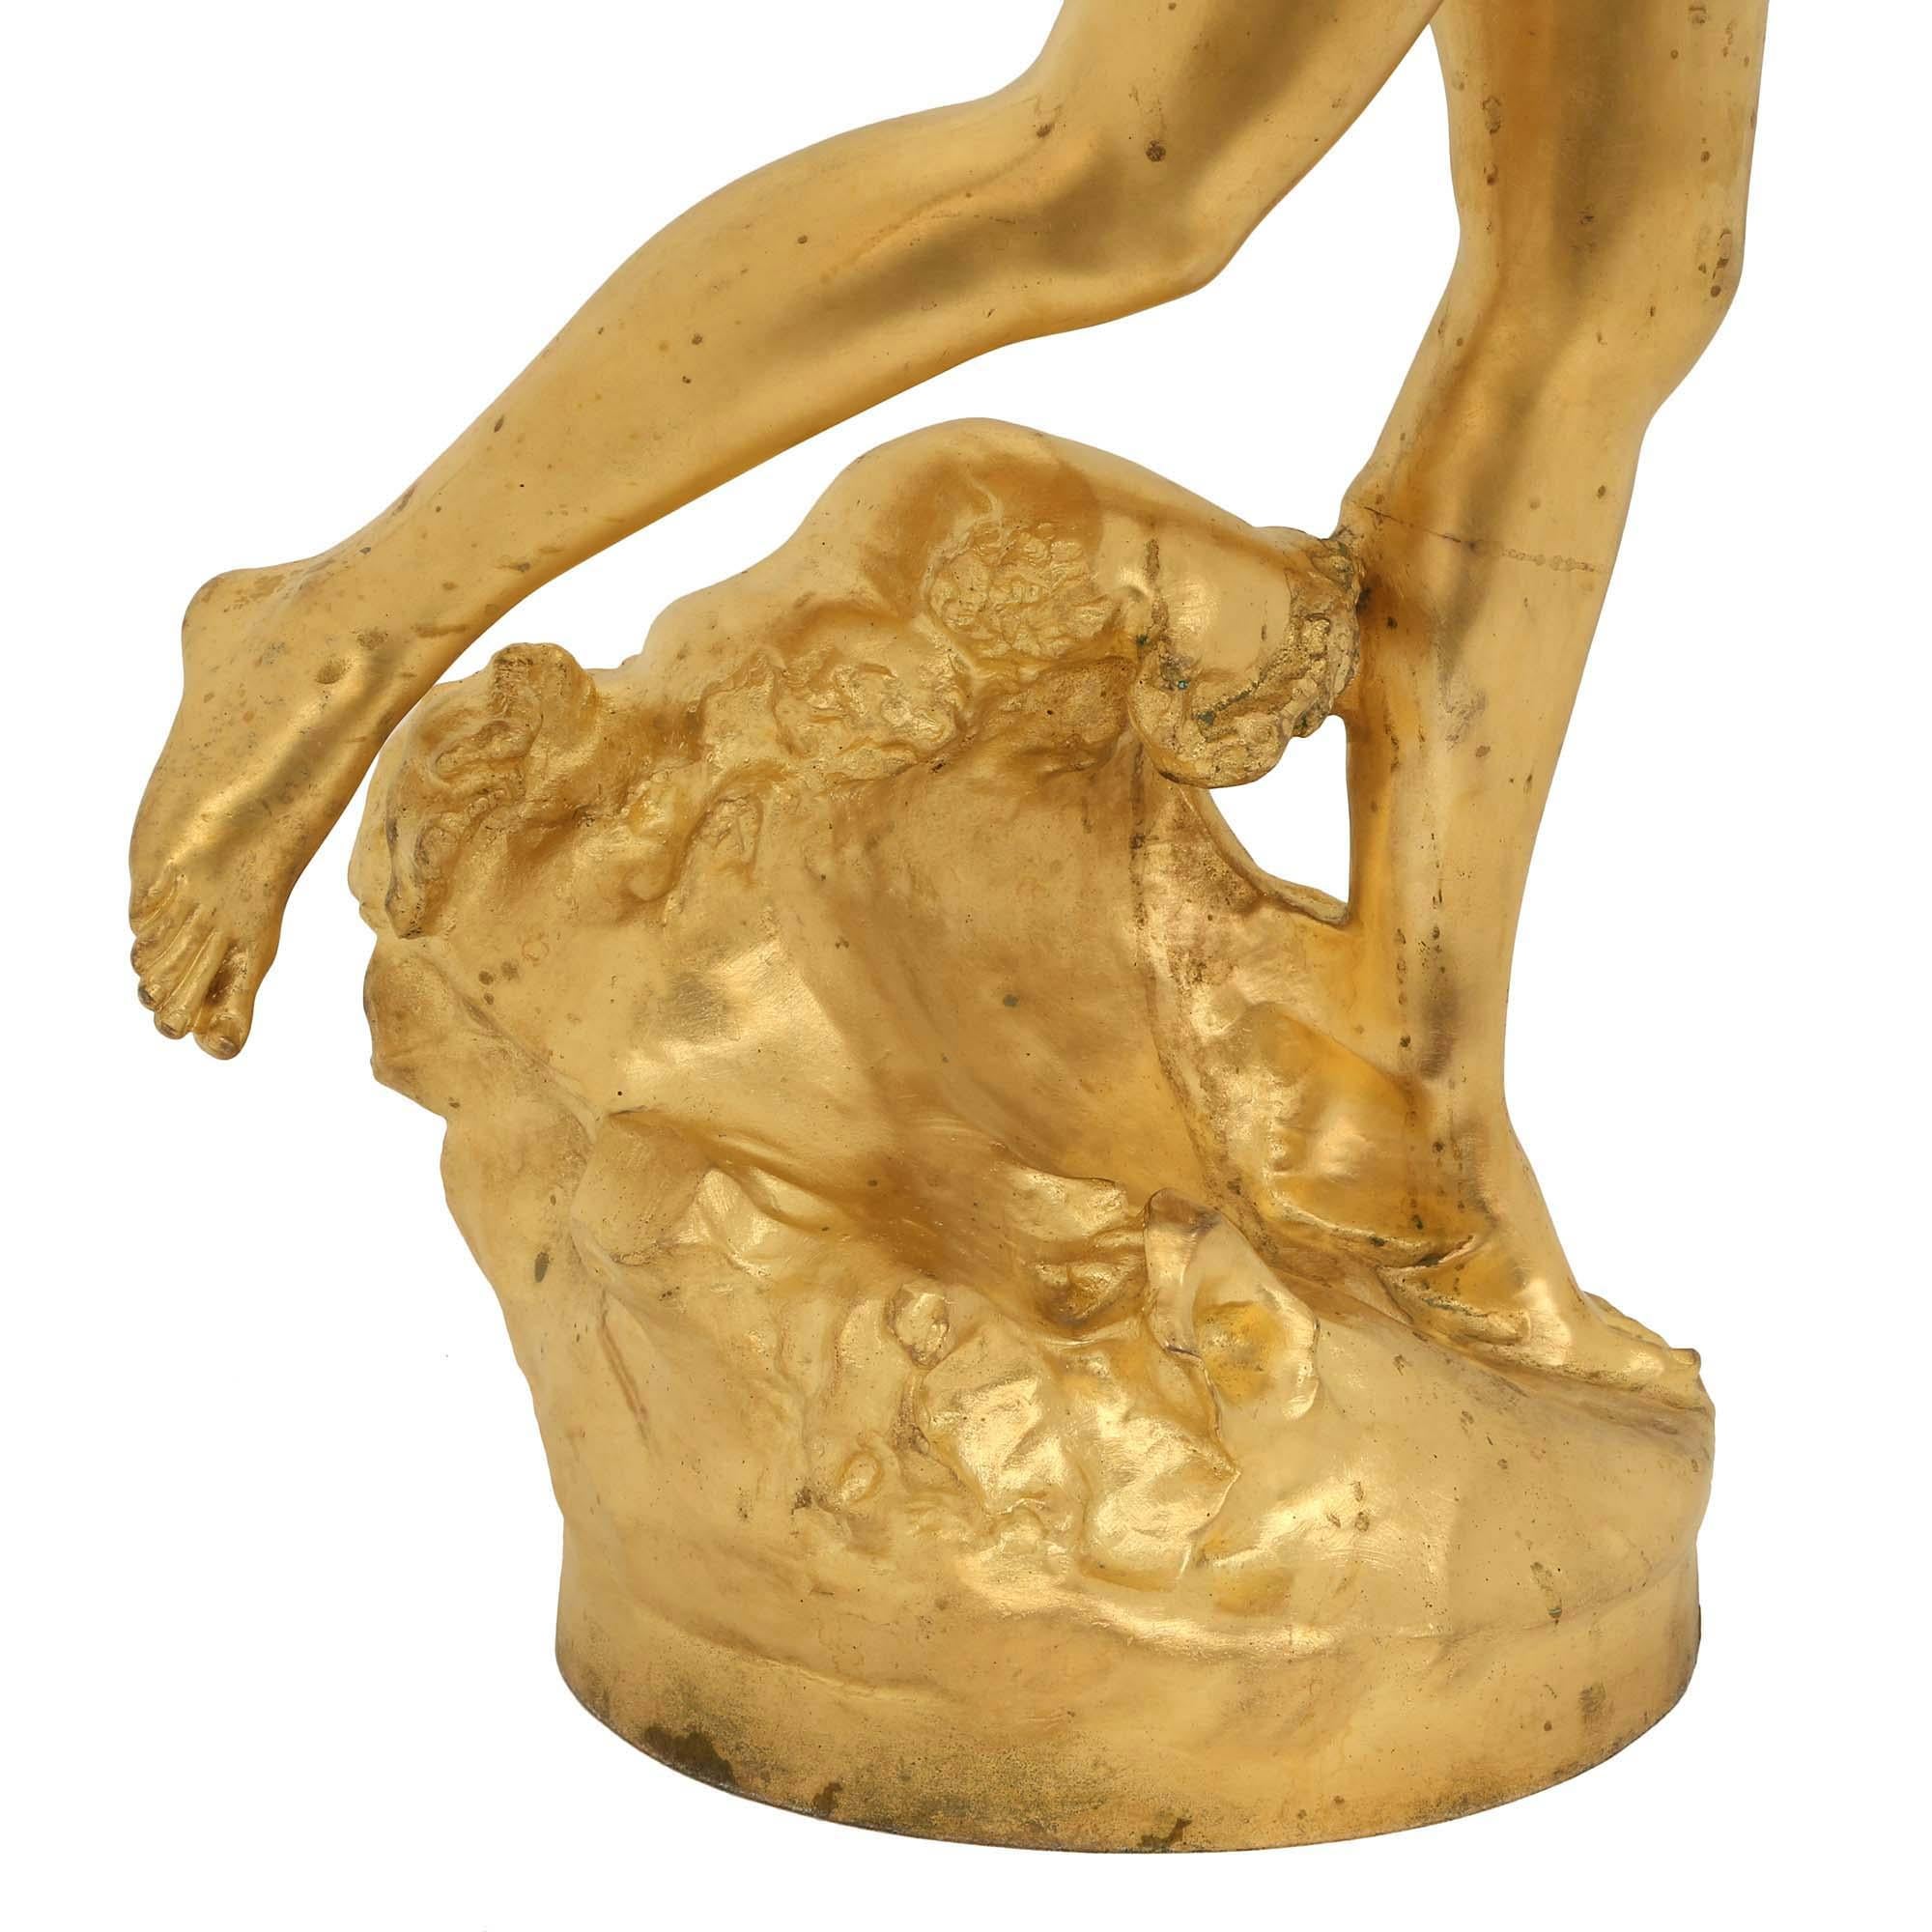  French 19th Century Ormolu Statue of Nereids, Signed Claude-André Férigoule For Sale 6